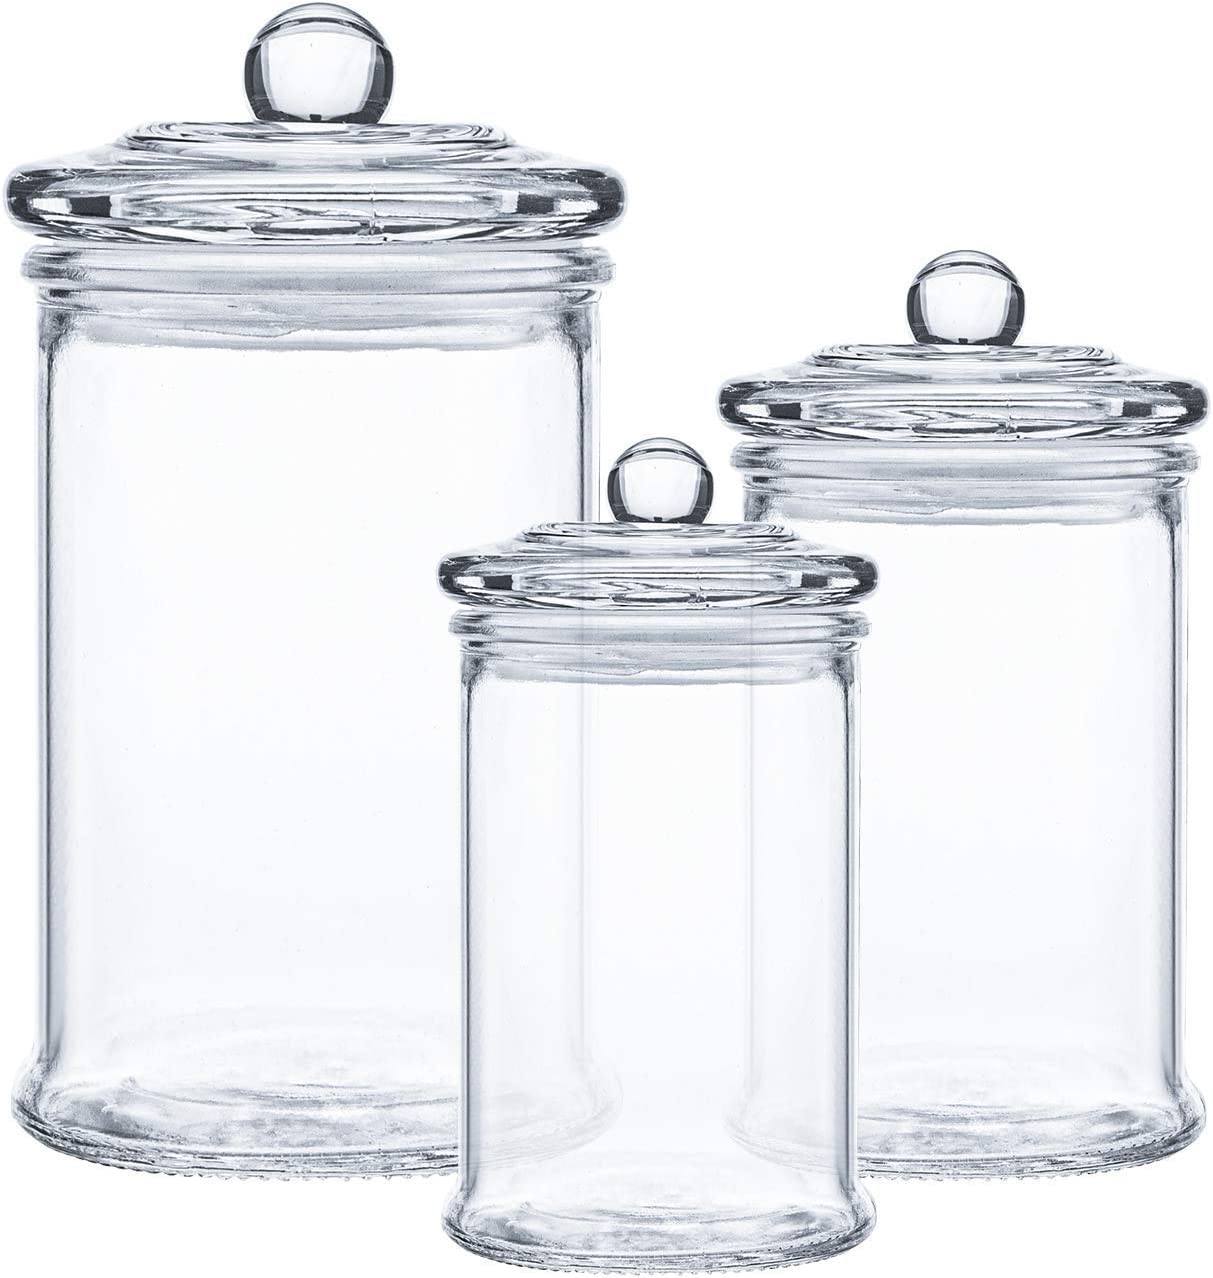  Suwimut Set of 3 Glass Apothecary Jars with Lids